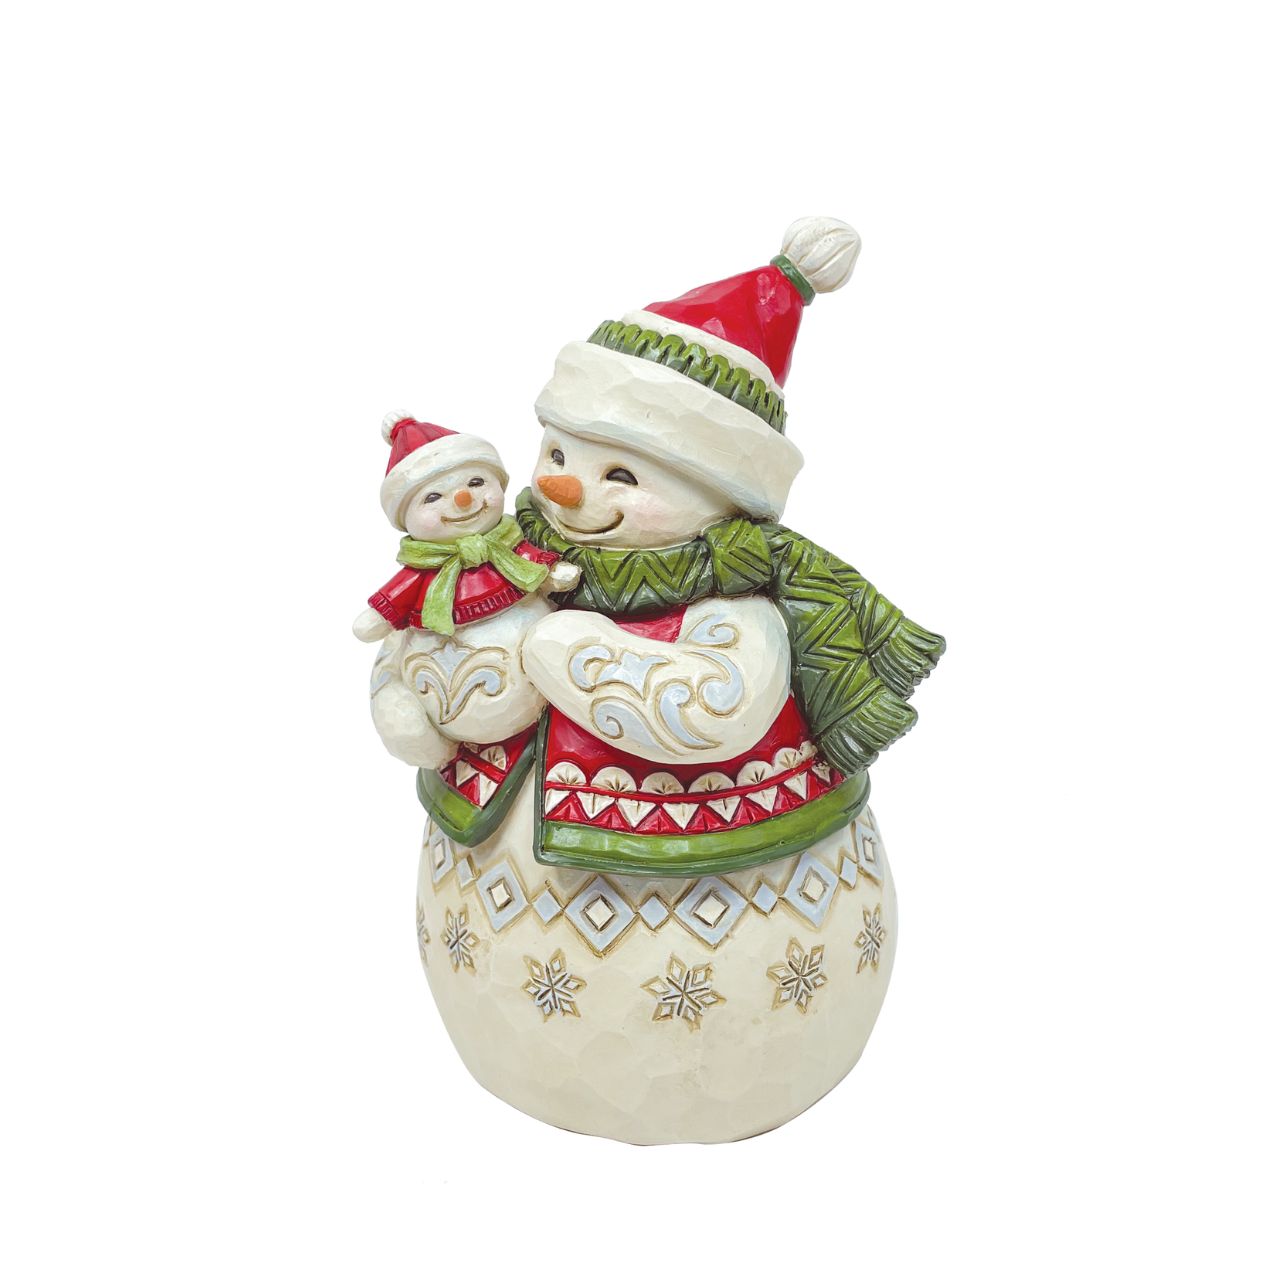 Heartwood Creek  Pint Sized Snowmom With Baby Figurine  Traditional Heartwood Creek Collection; Wood carved textures and intricately detailed designs. This collection of festive pint sized figurines are the perfect addition to a collection, without breaking the bank.